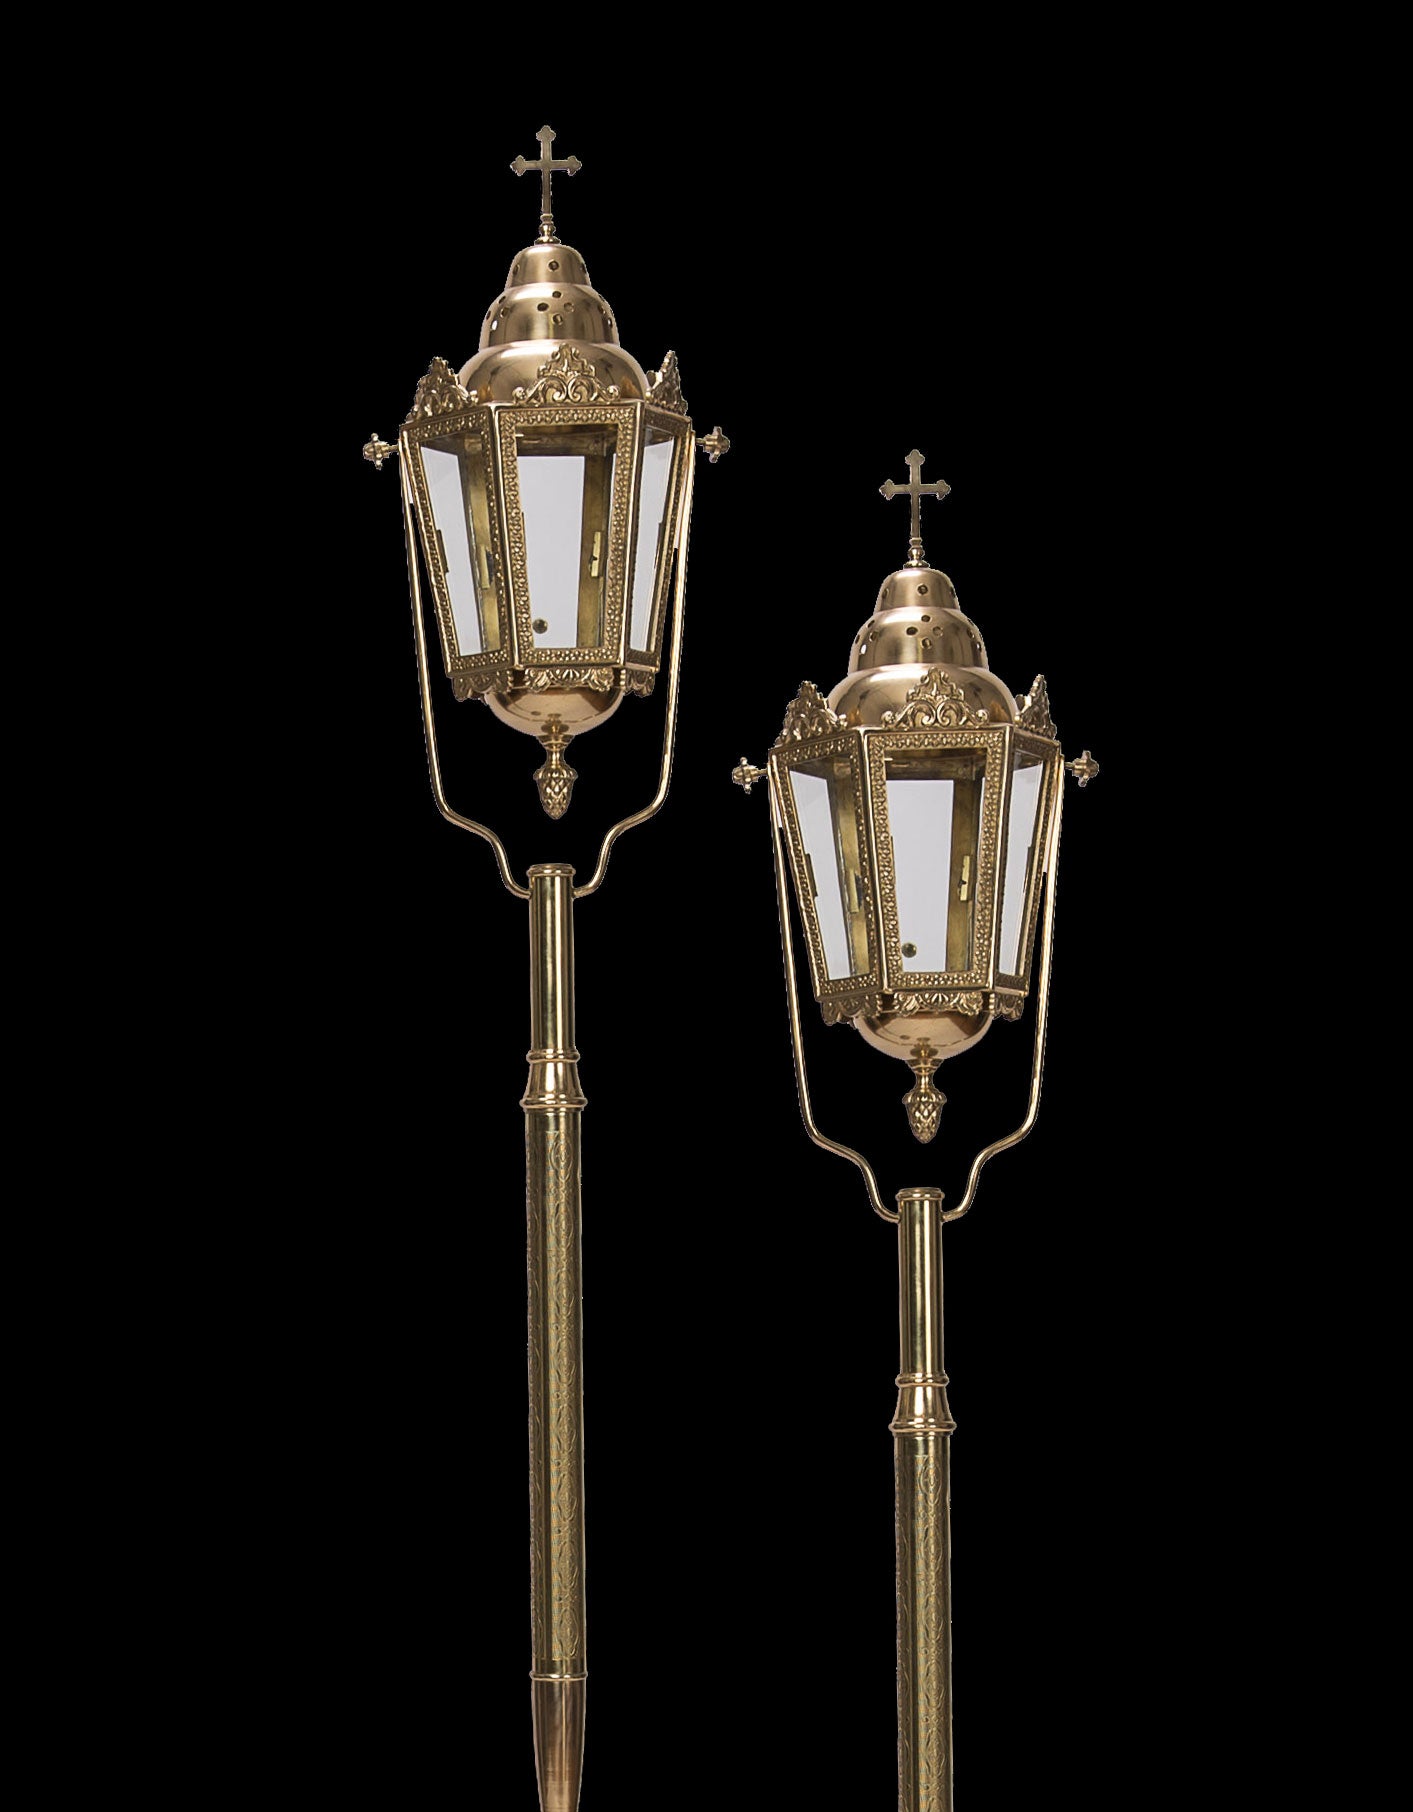 brass-processional-acolyte-torches-candlesticks-h130.jpg